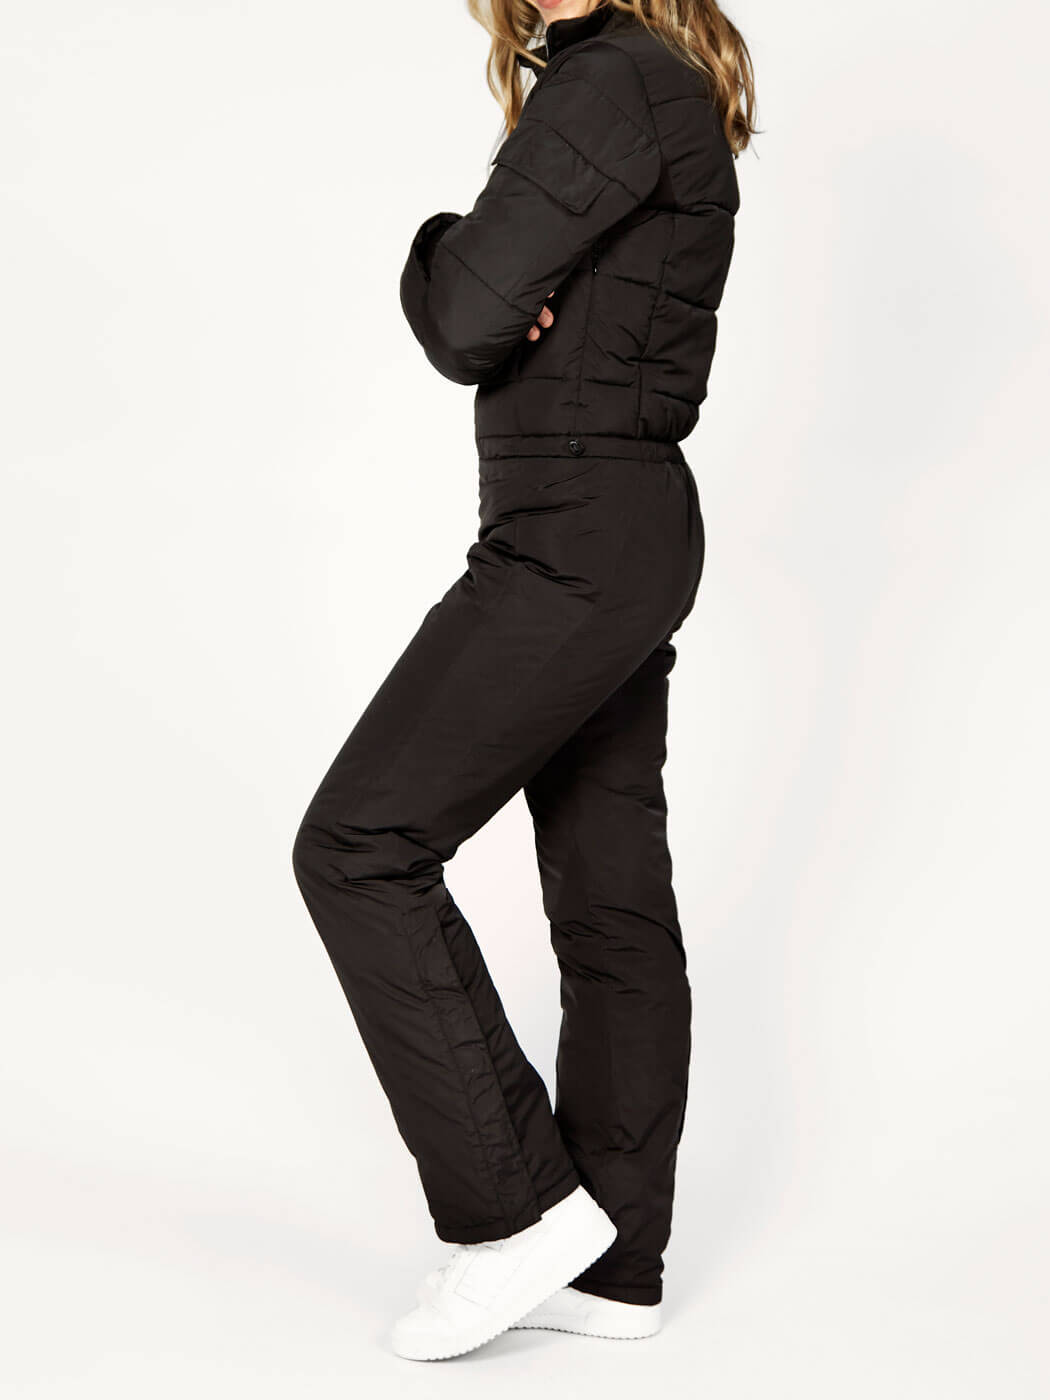 black-warm-winter-suit-for-ladies-at-the-dalset